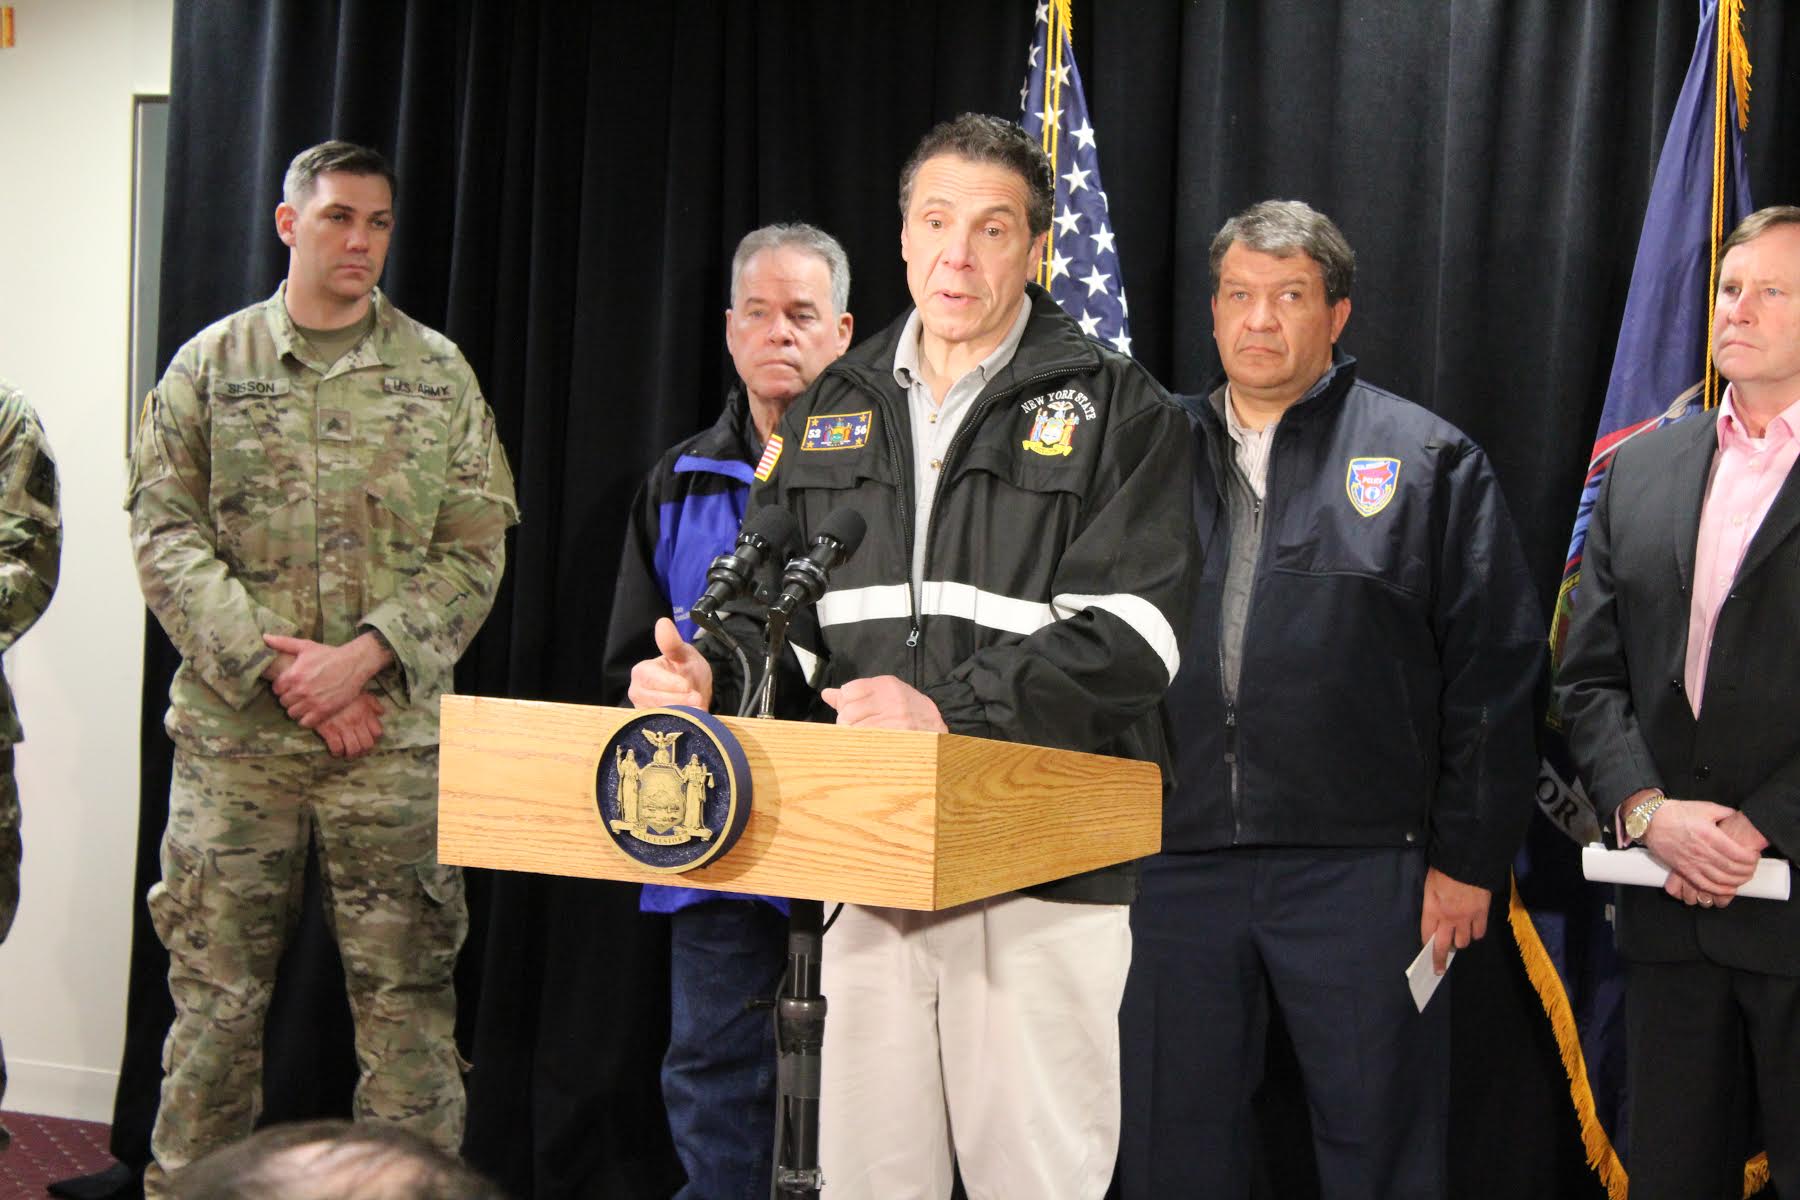 DAY AND CUOMO HOLD JOINT PRESS CONFERENCE PRIOR TO NOR’EASTER